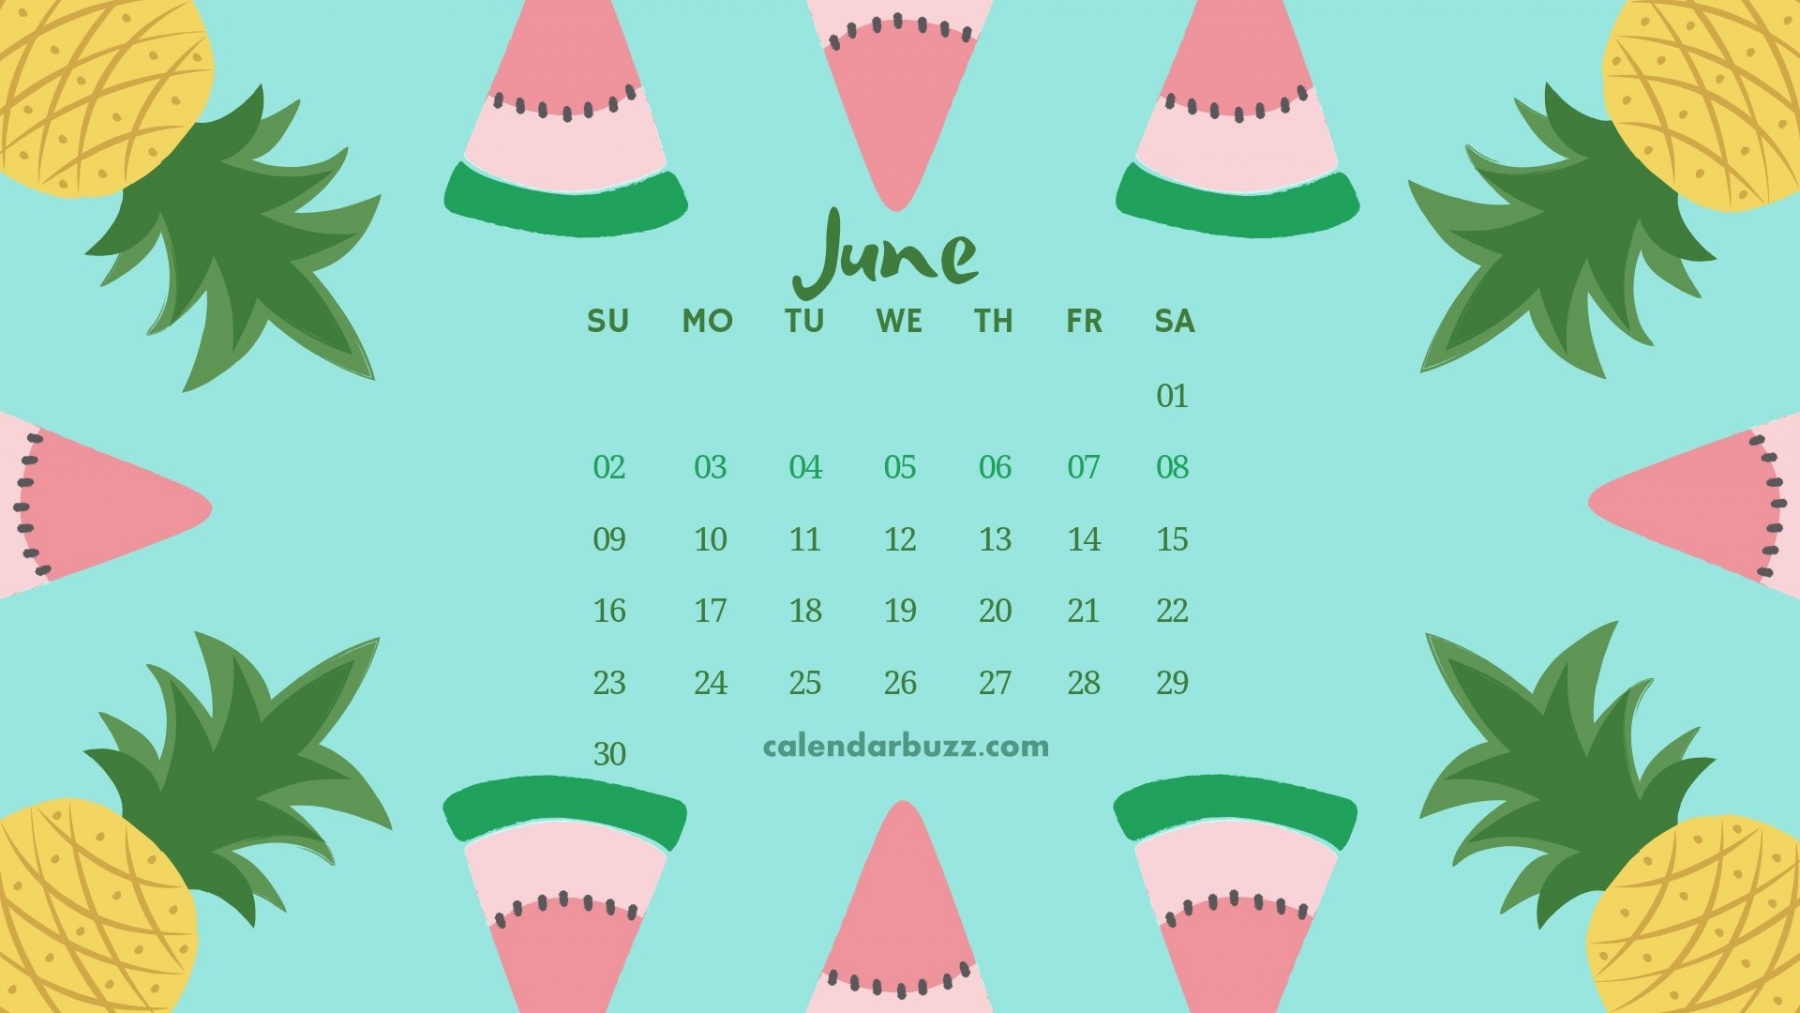 june-2019-calendar-hd-wallpapers-and-background-images-yl-computing